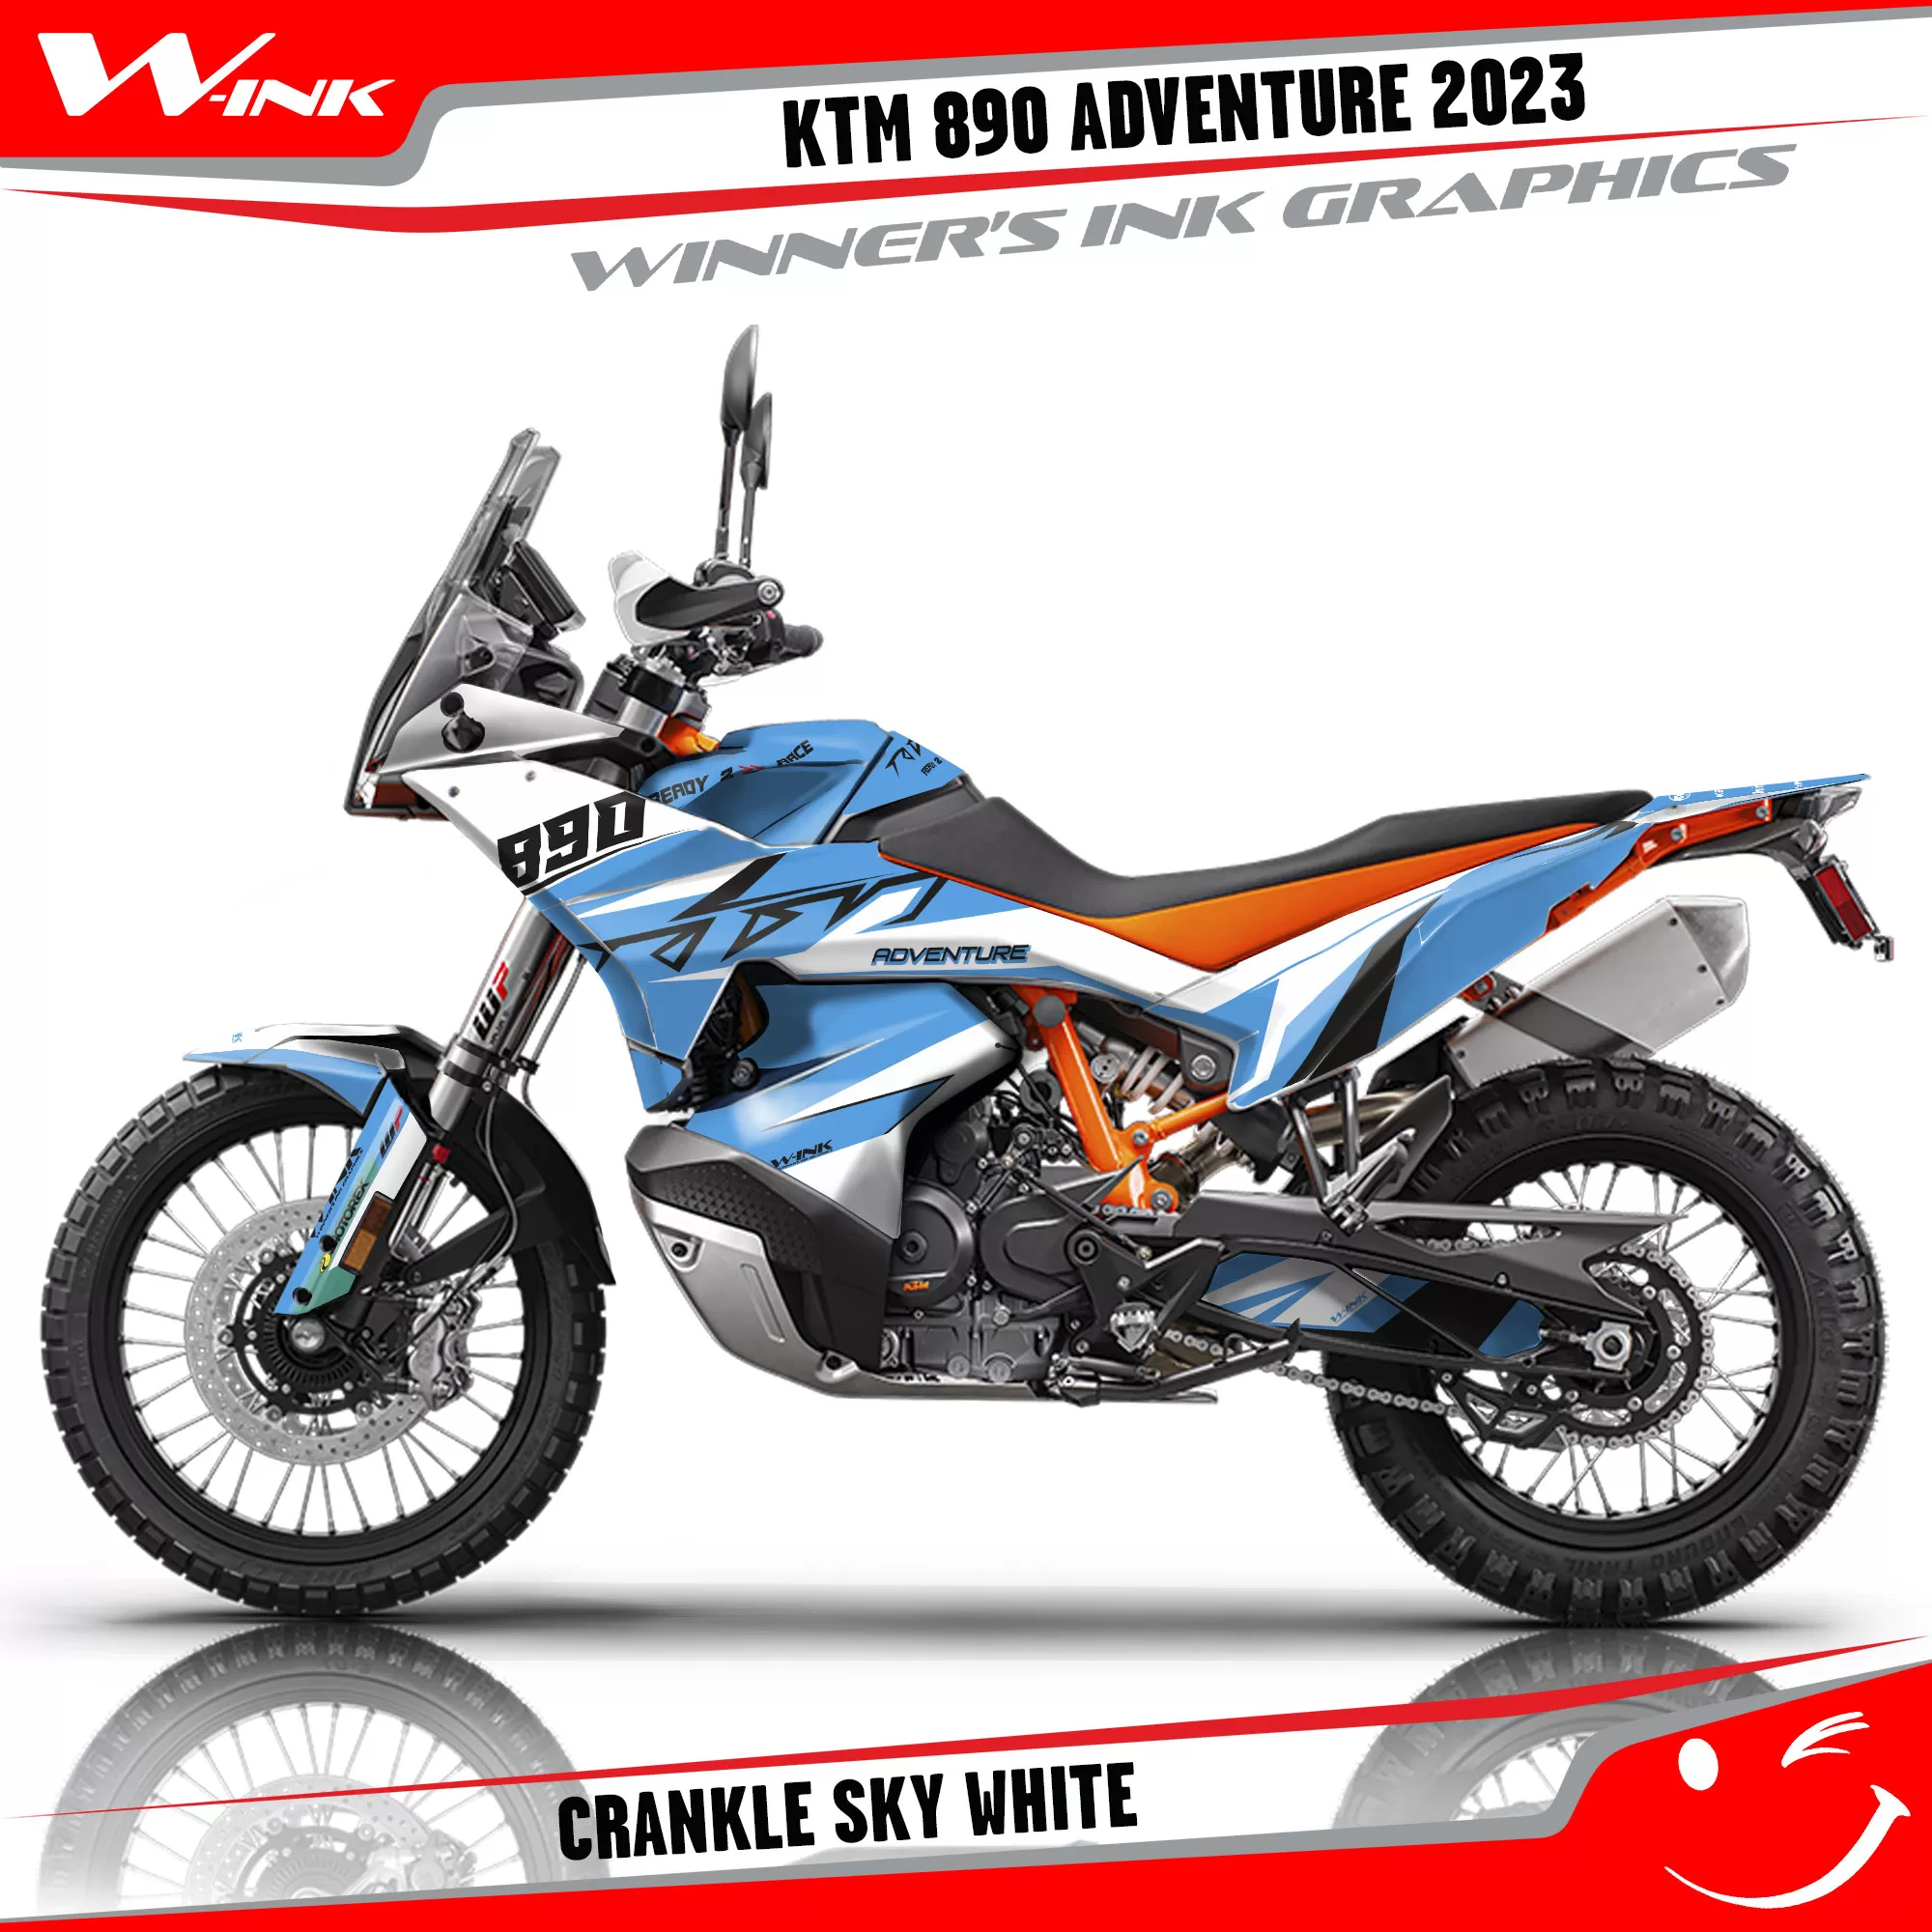 Adventure-890-2023-graphics-kit-and-decals-with-design-Crankle-Sky-White